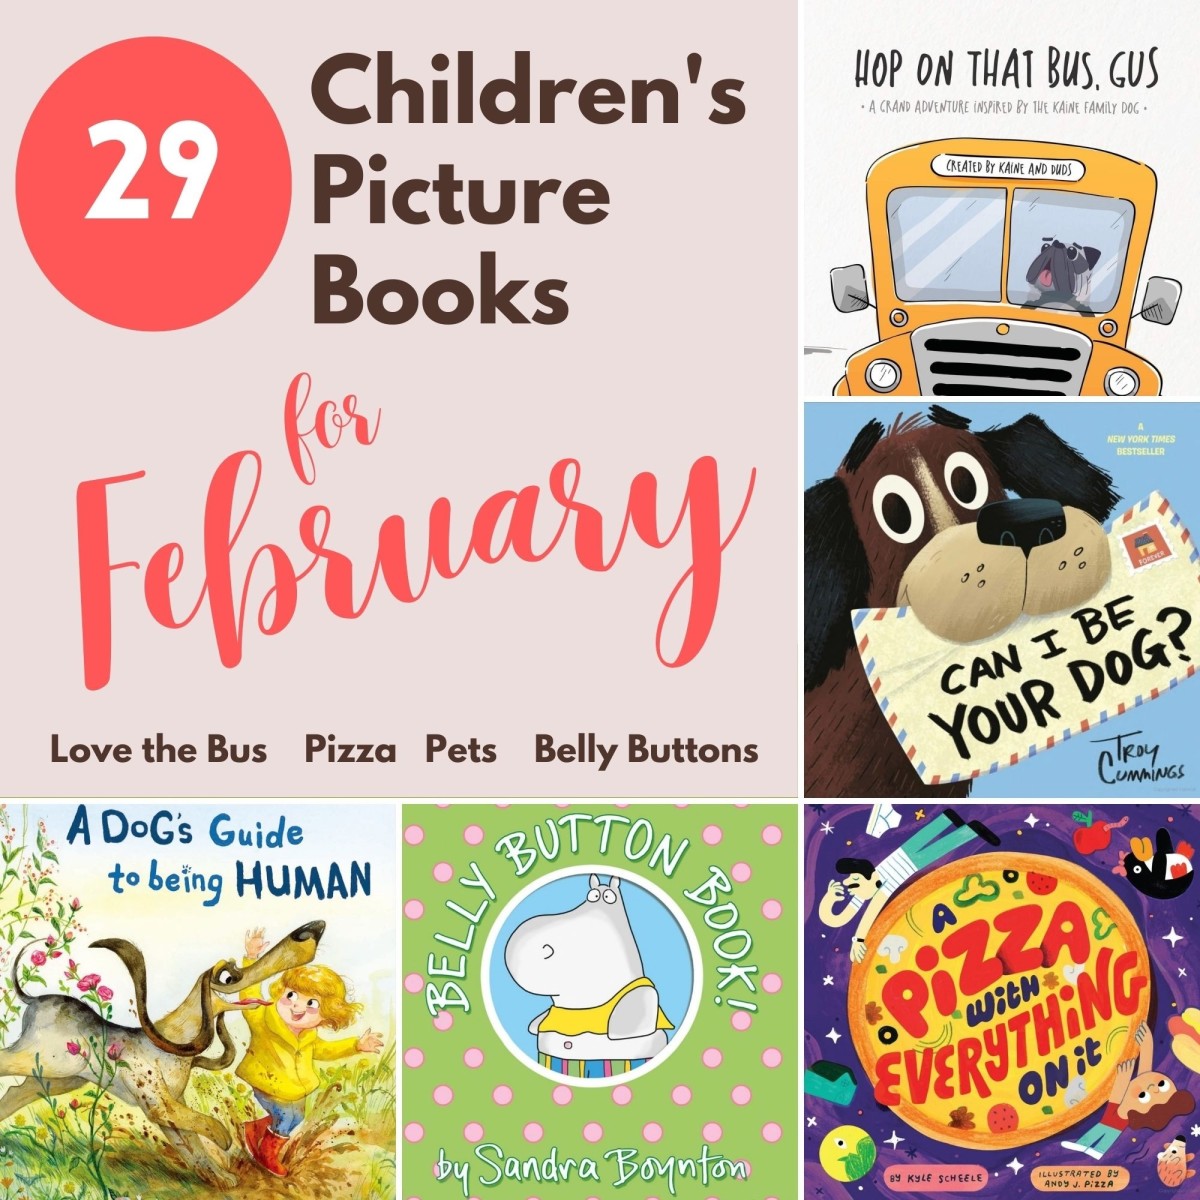 29 Children's Books for February: Pizza, Love the Bus, and Belly Button and Pet Themes